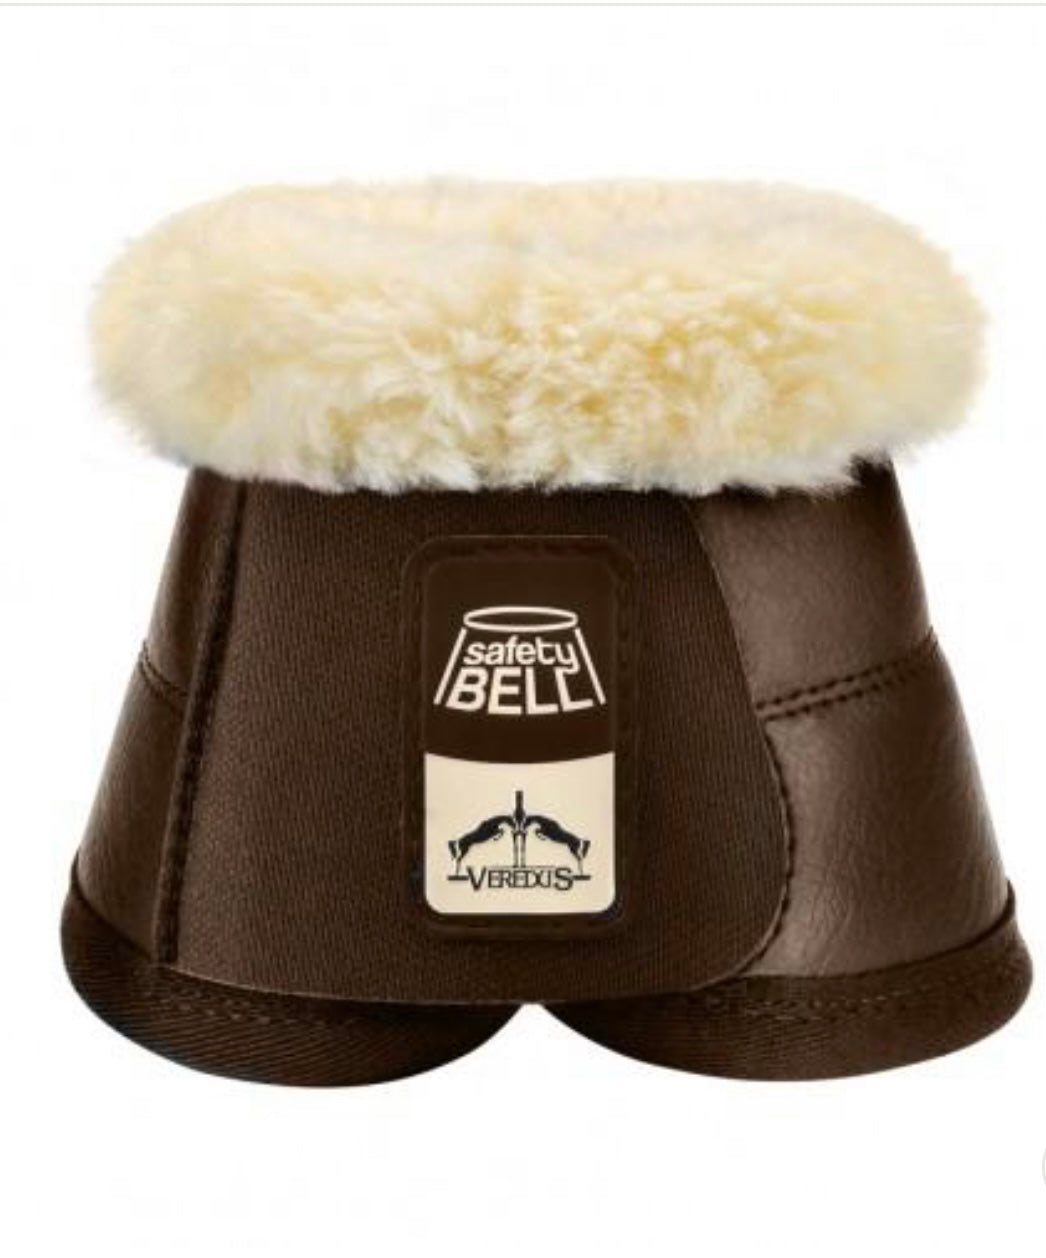 Veredus Save the Sheep Safety Bell Overreach Boots